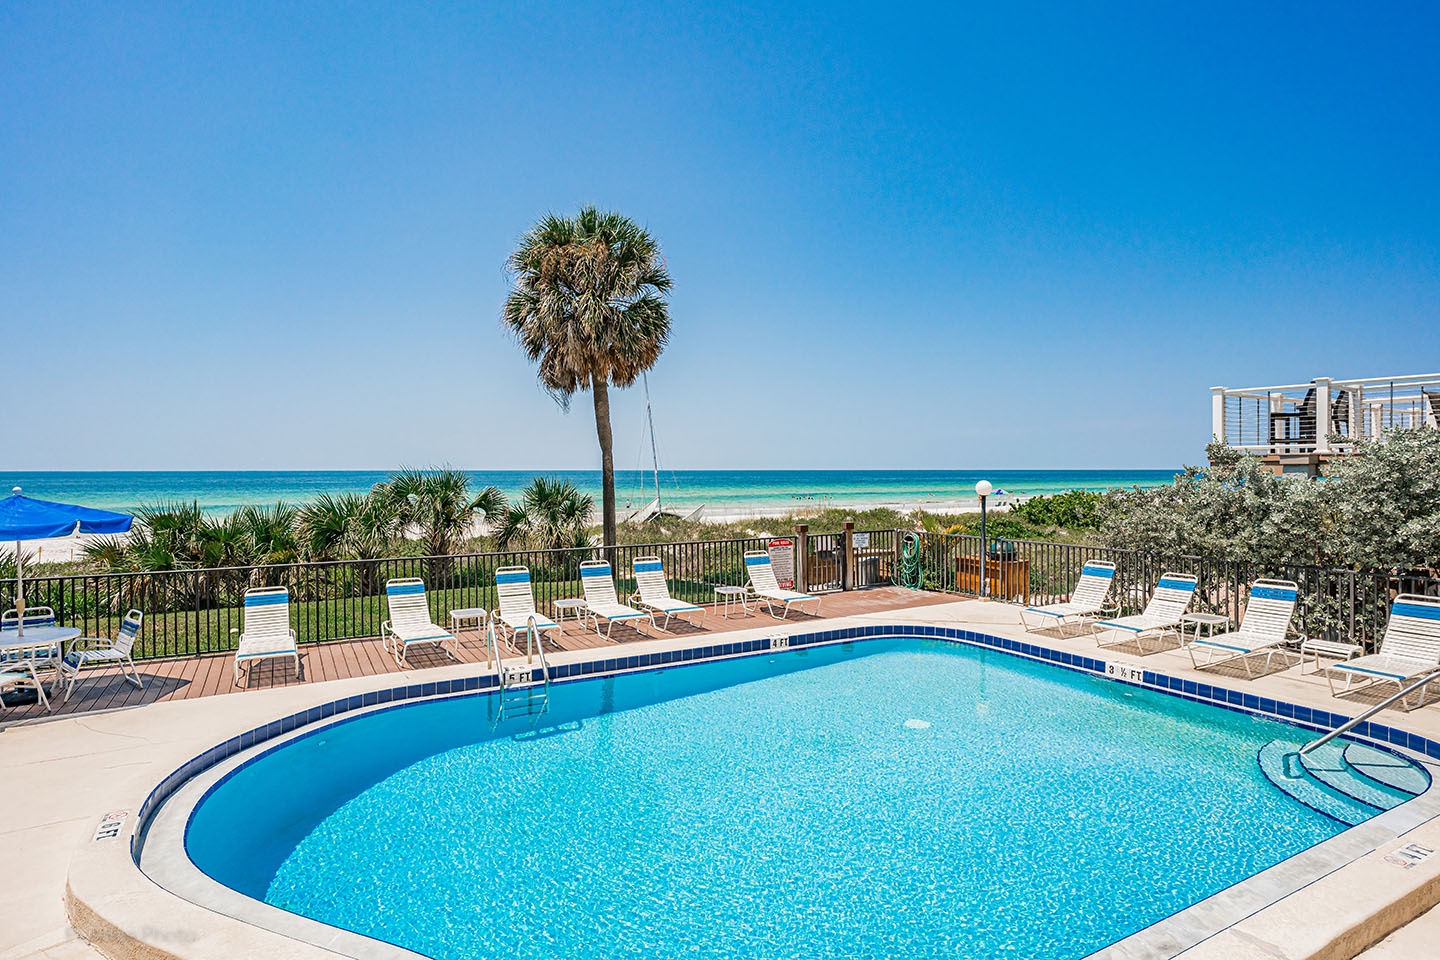 The pool deck with the Gulf of Mexico in the background.